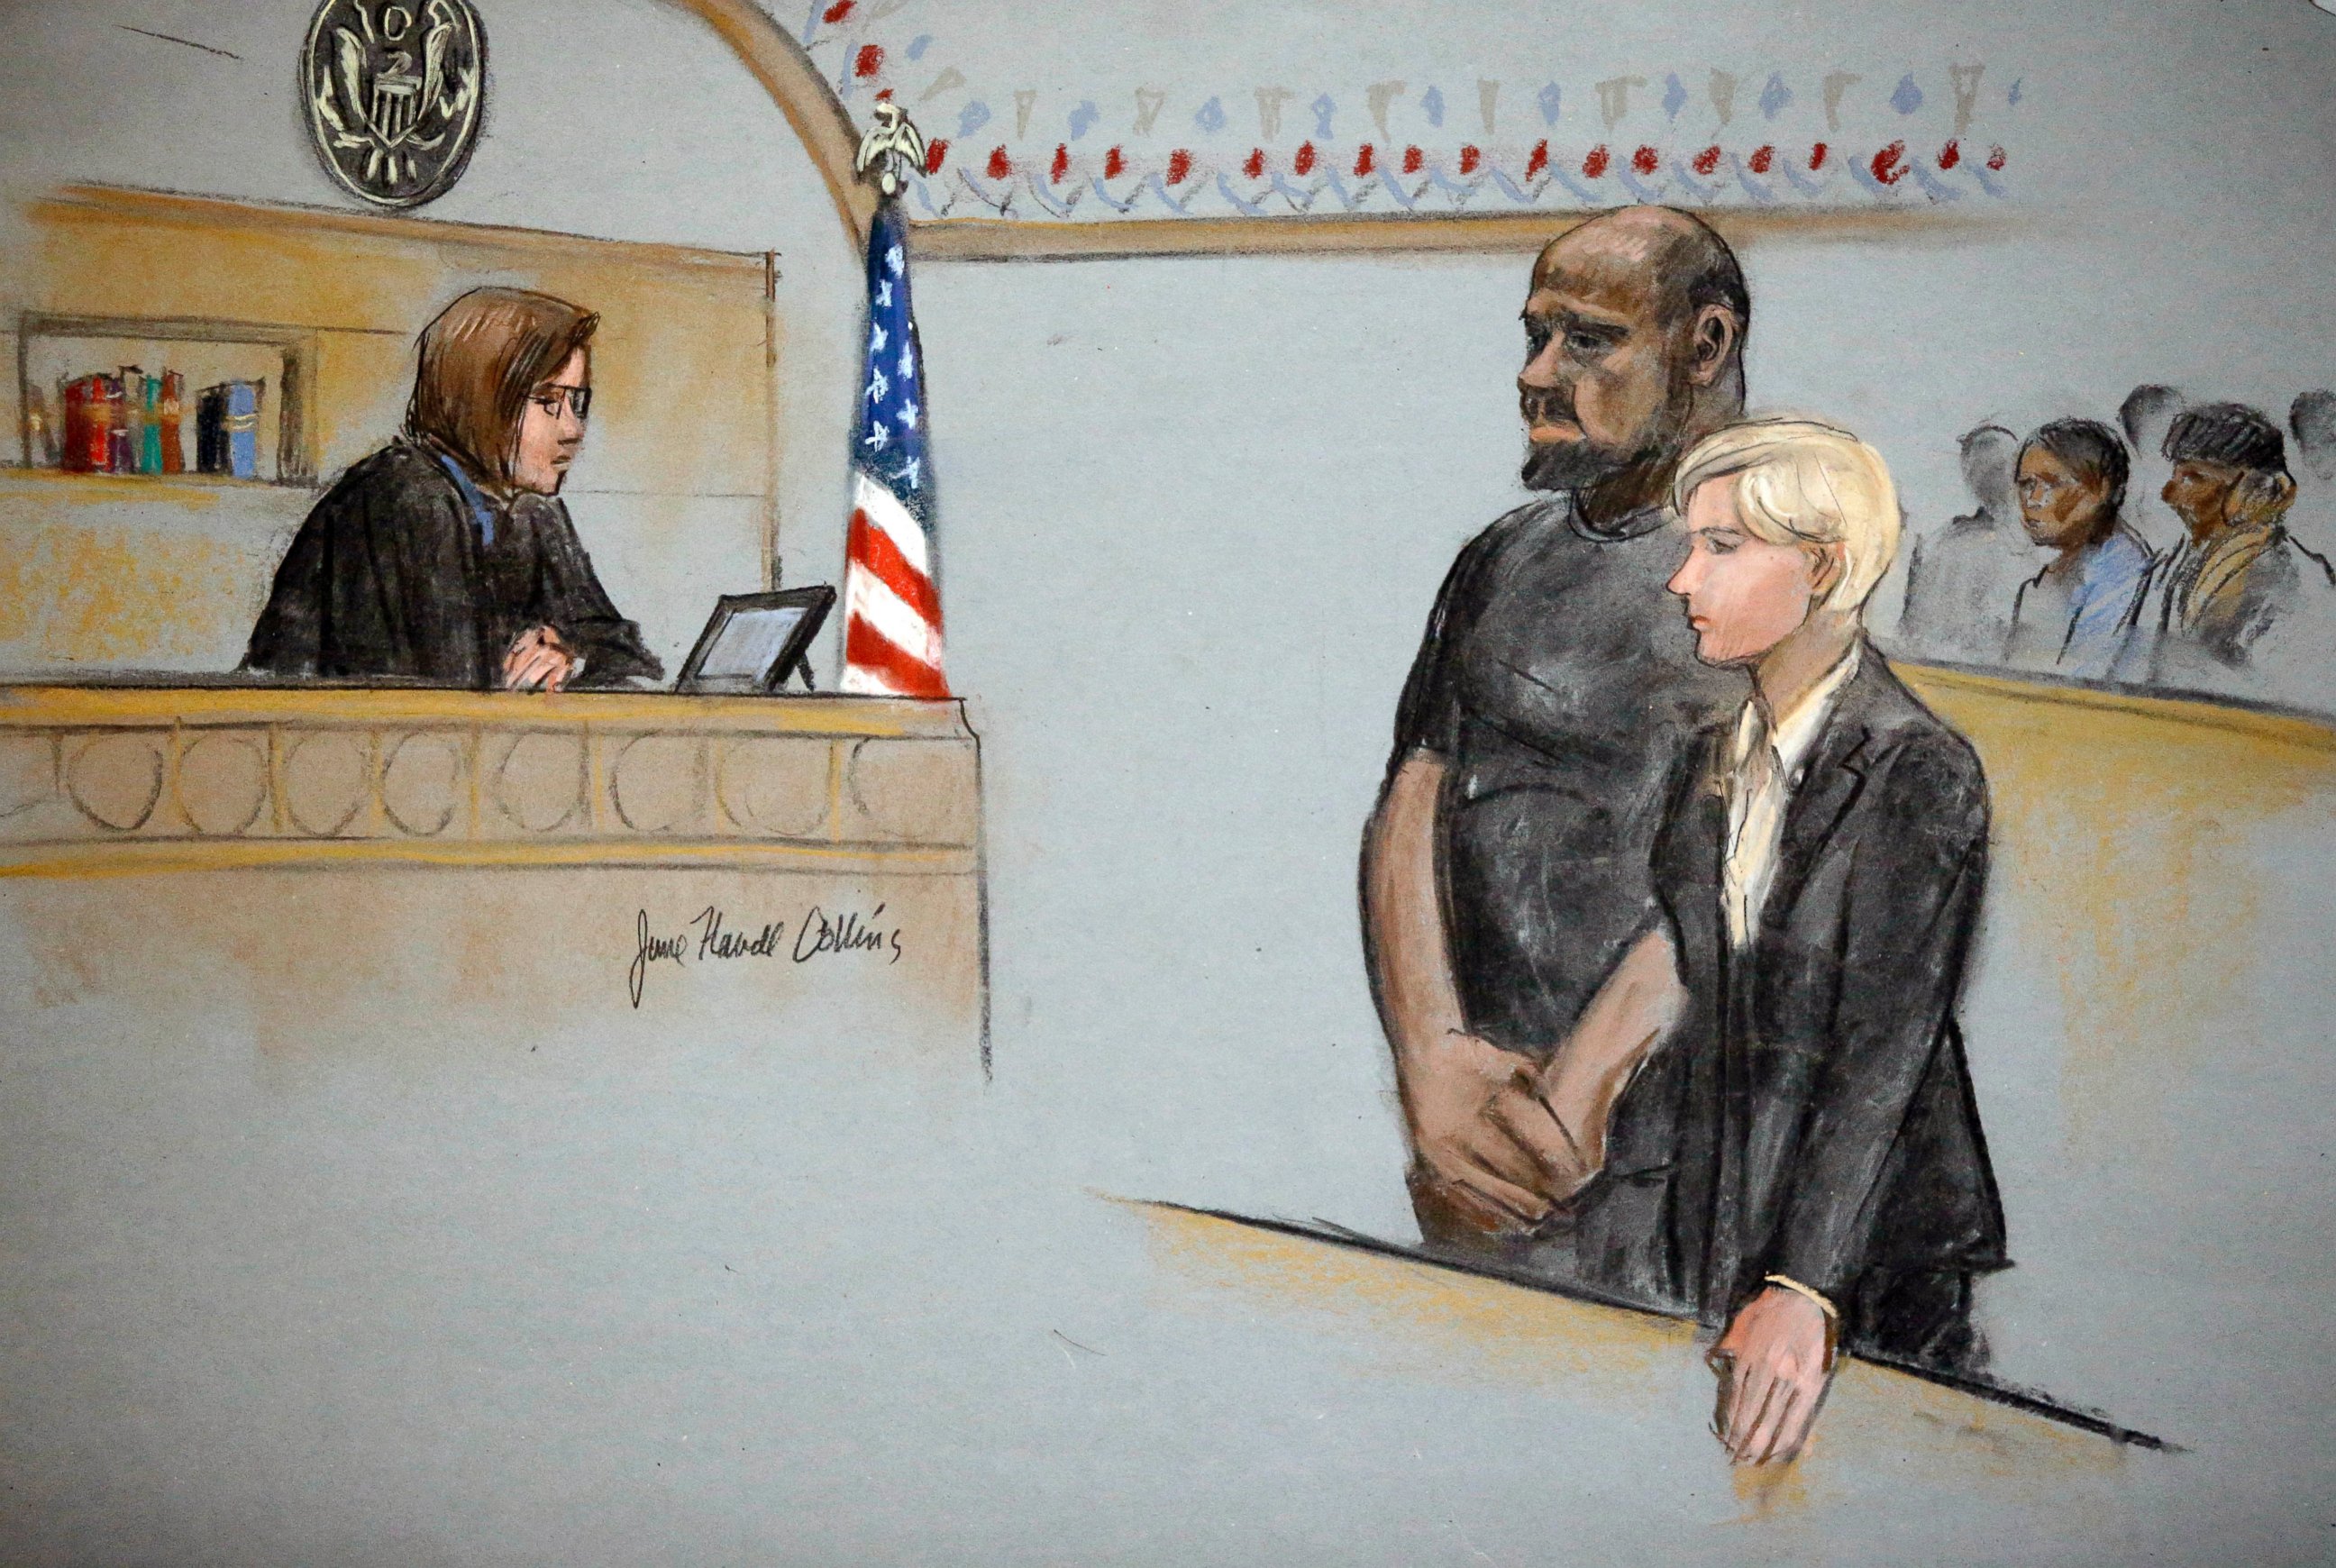 PHOTO: In this courtroom sketch, David Wright, is depicted standing with his attorney Jessica Hedges as Magistrate Judge M. Page Kelley presides during a hearing, June 3, 2015, in federal court in Boston.